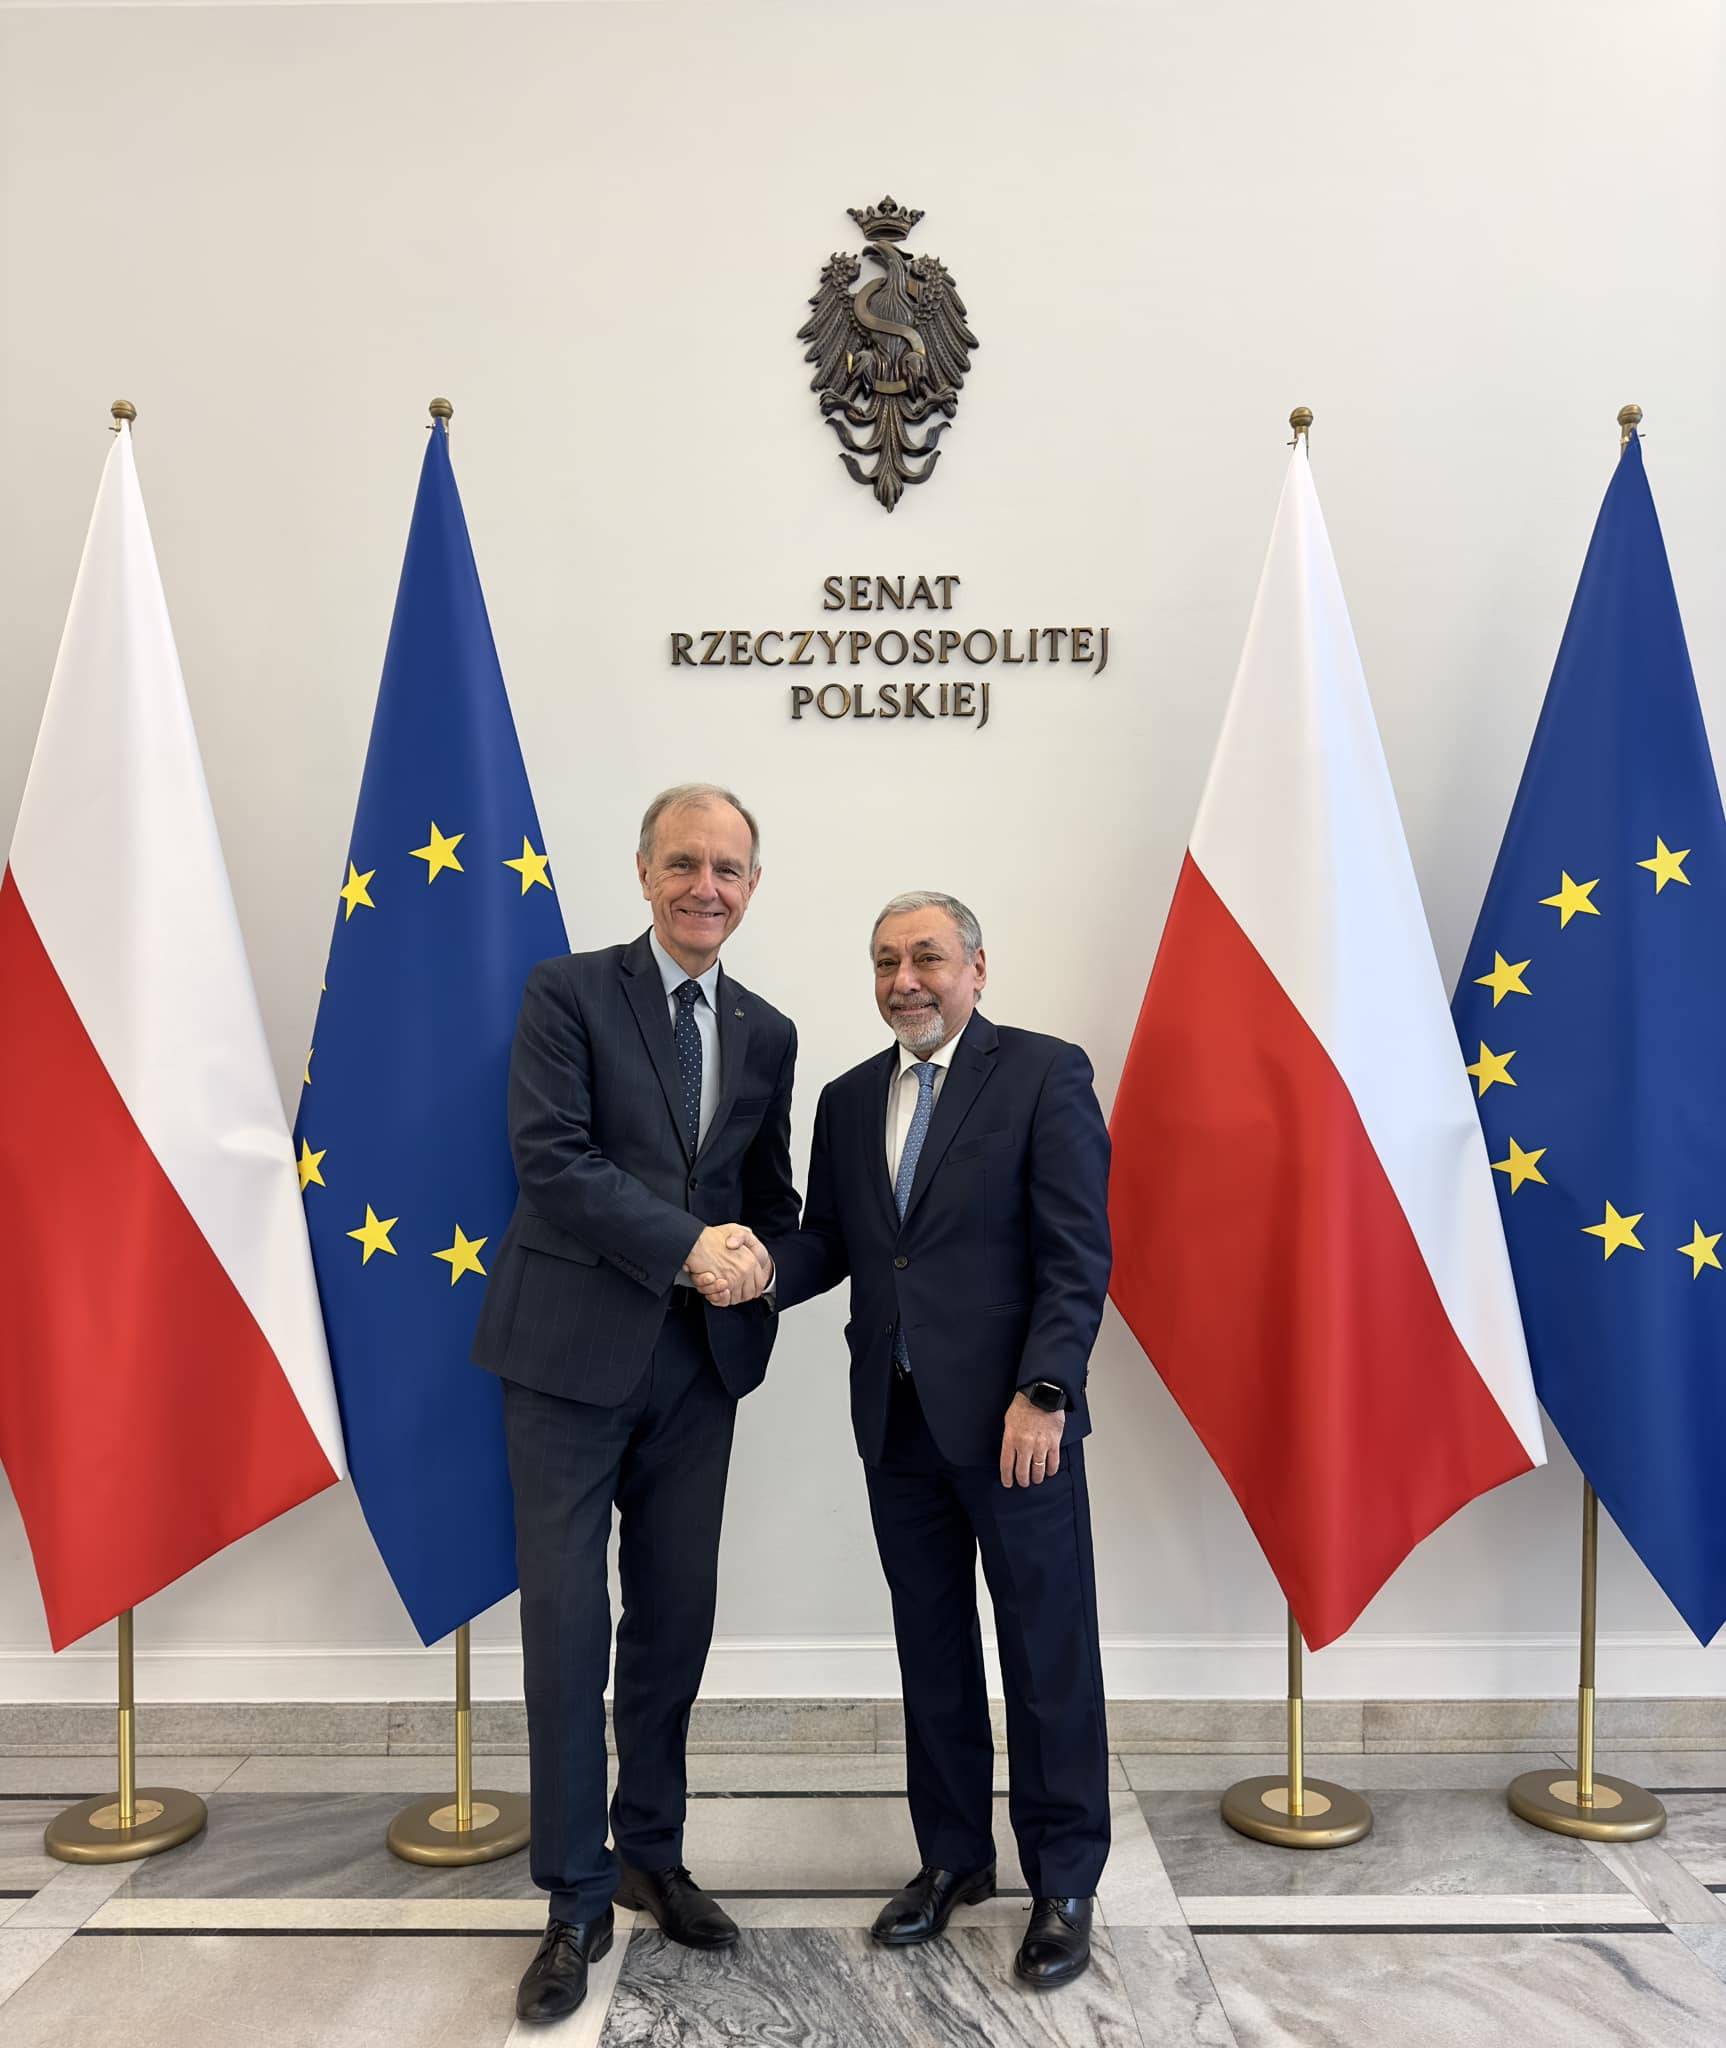 Meeting with the Chairman of the EU Affairs Committee of the Senate of Poland